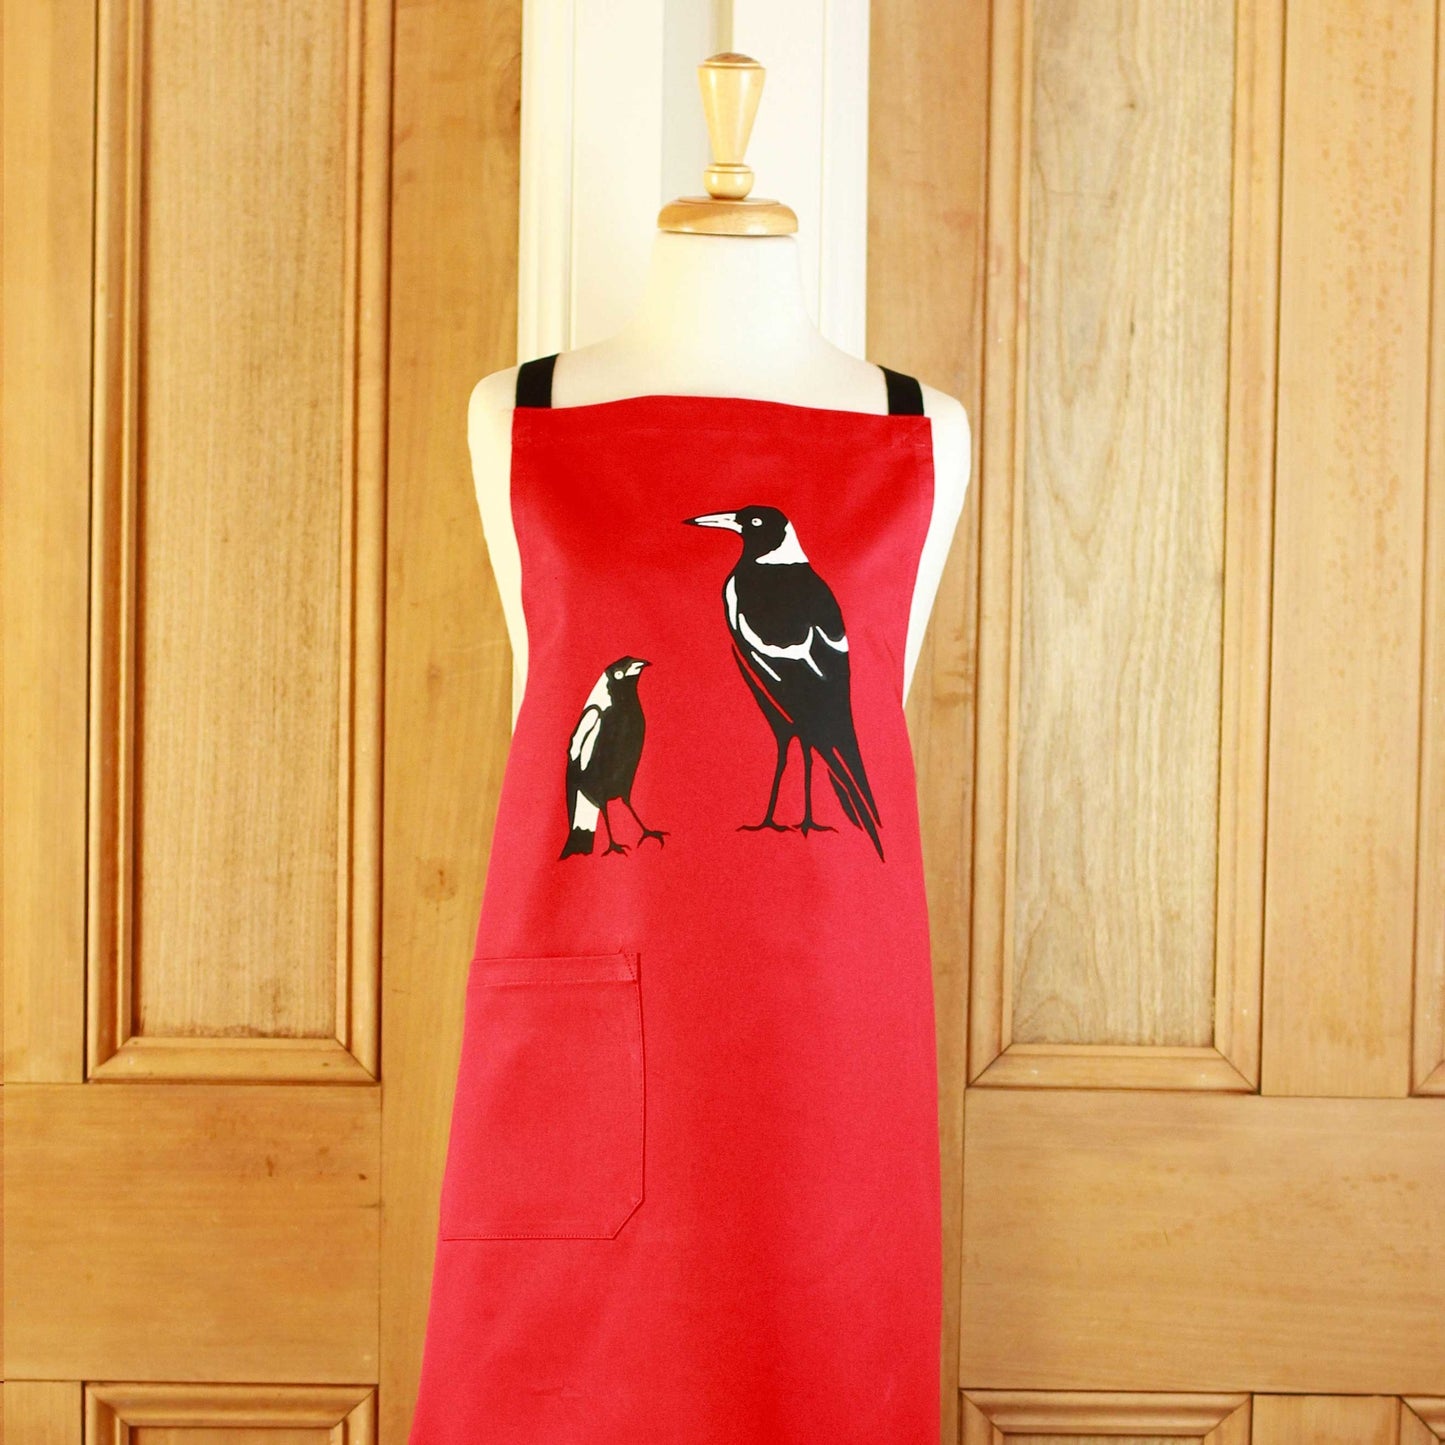 Red Magpie Apron with pockets. Handmade in Australia